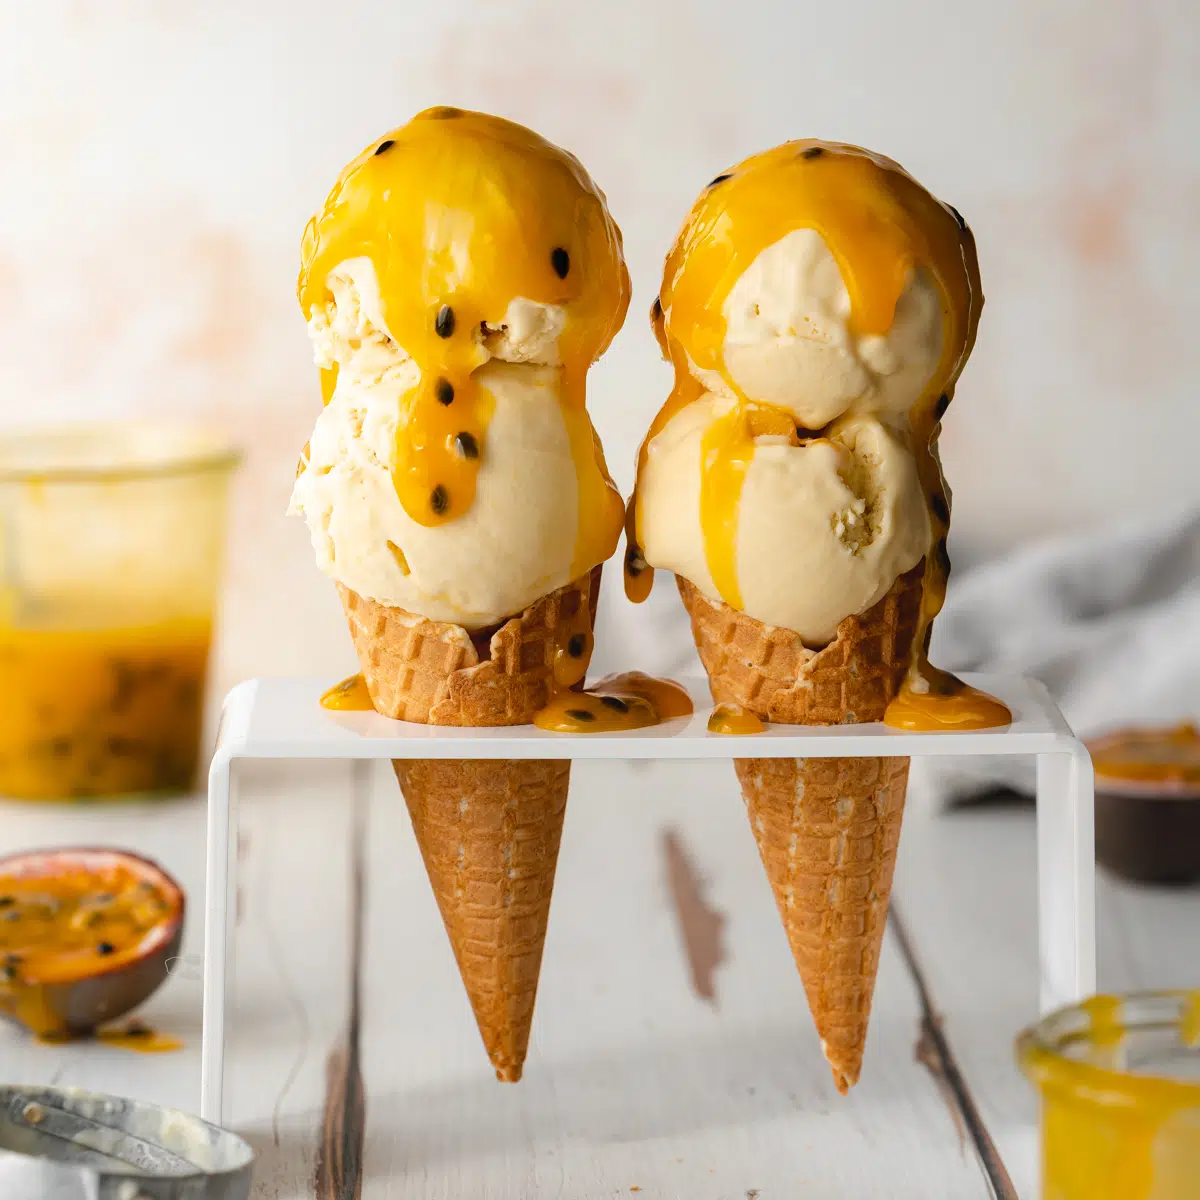 How To Make Passion Fruit Ice Cream Without An Ice Cream Maker